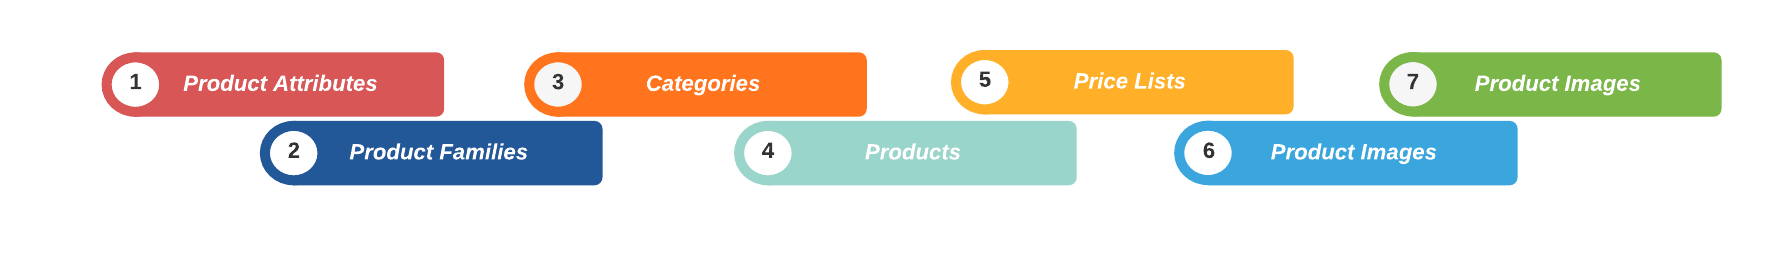 Product Import Sequence